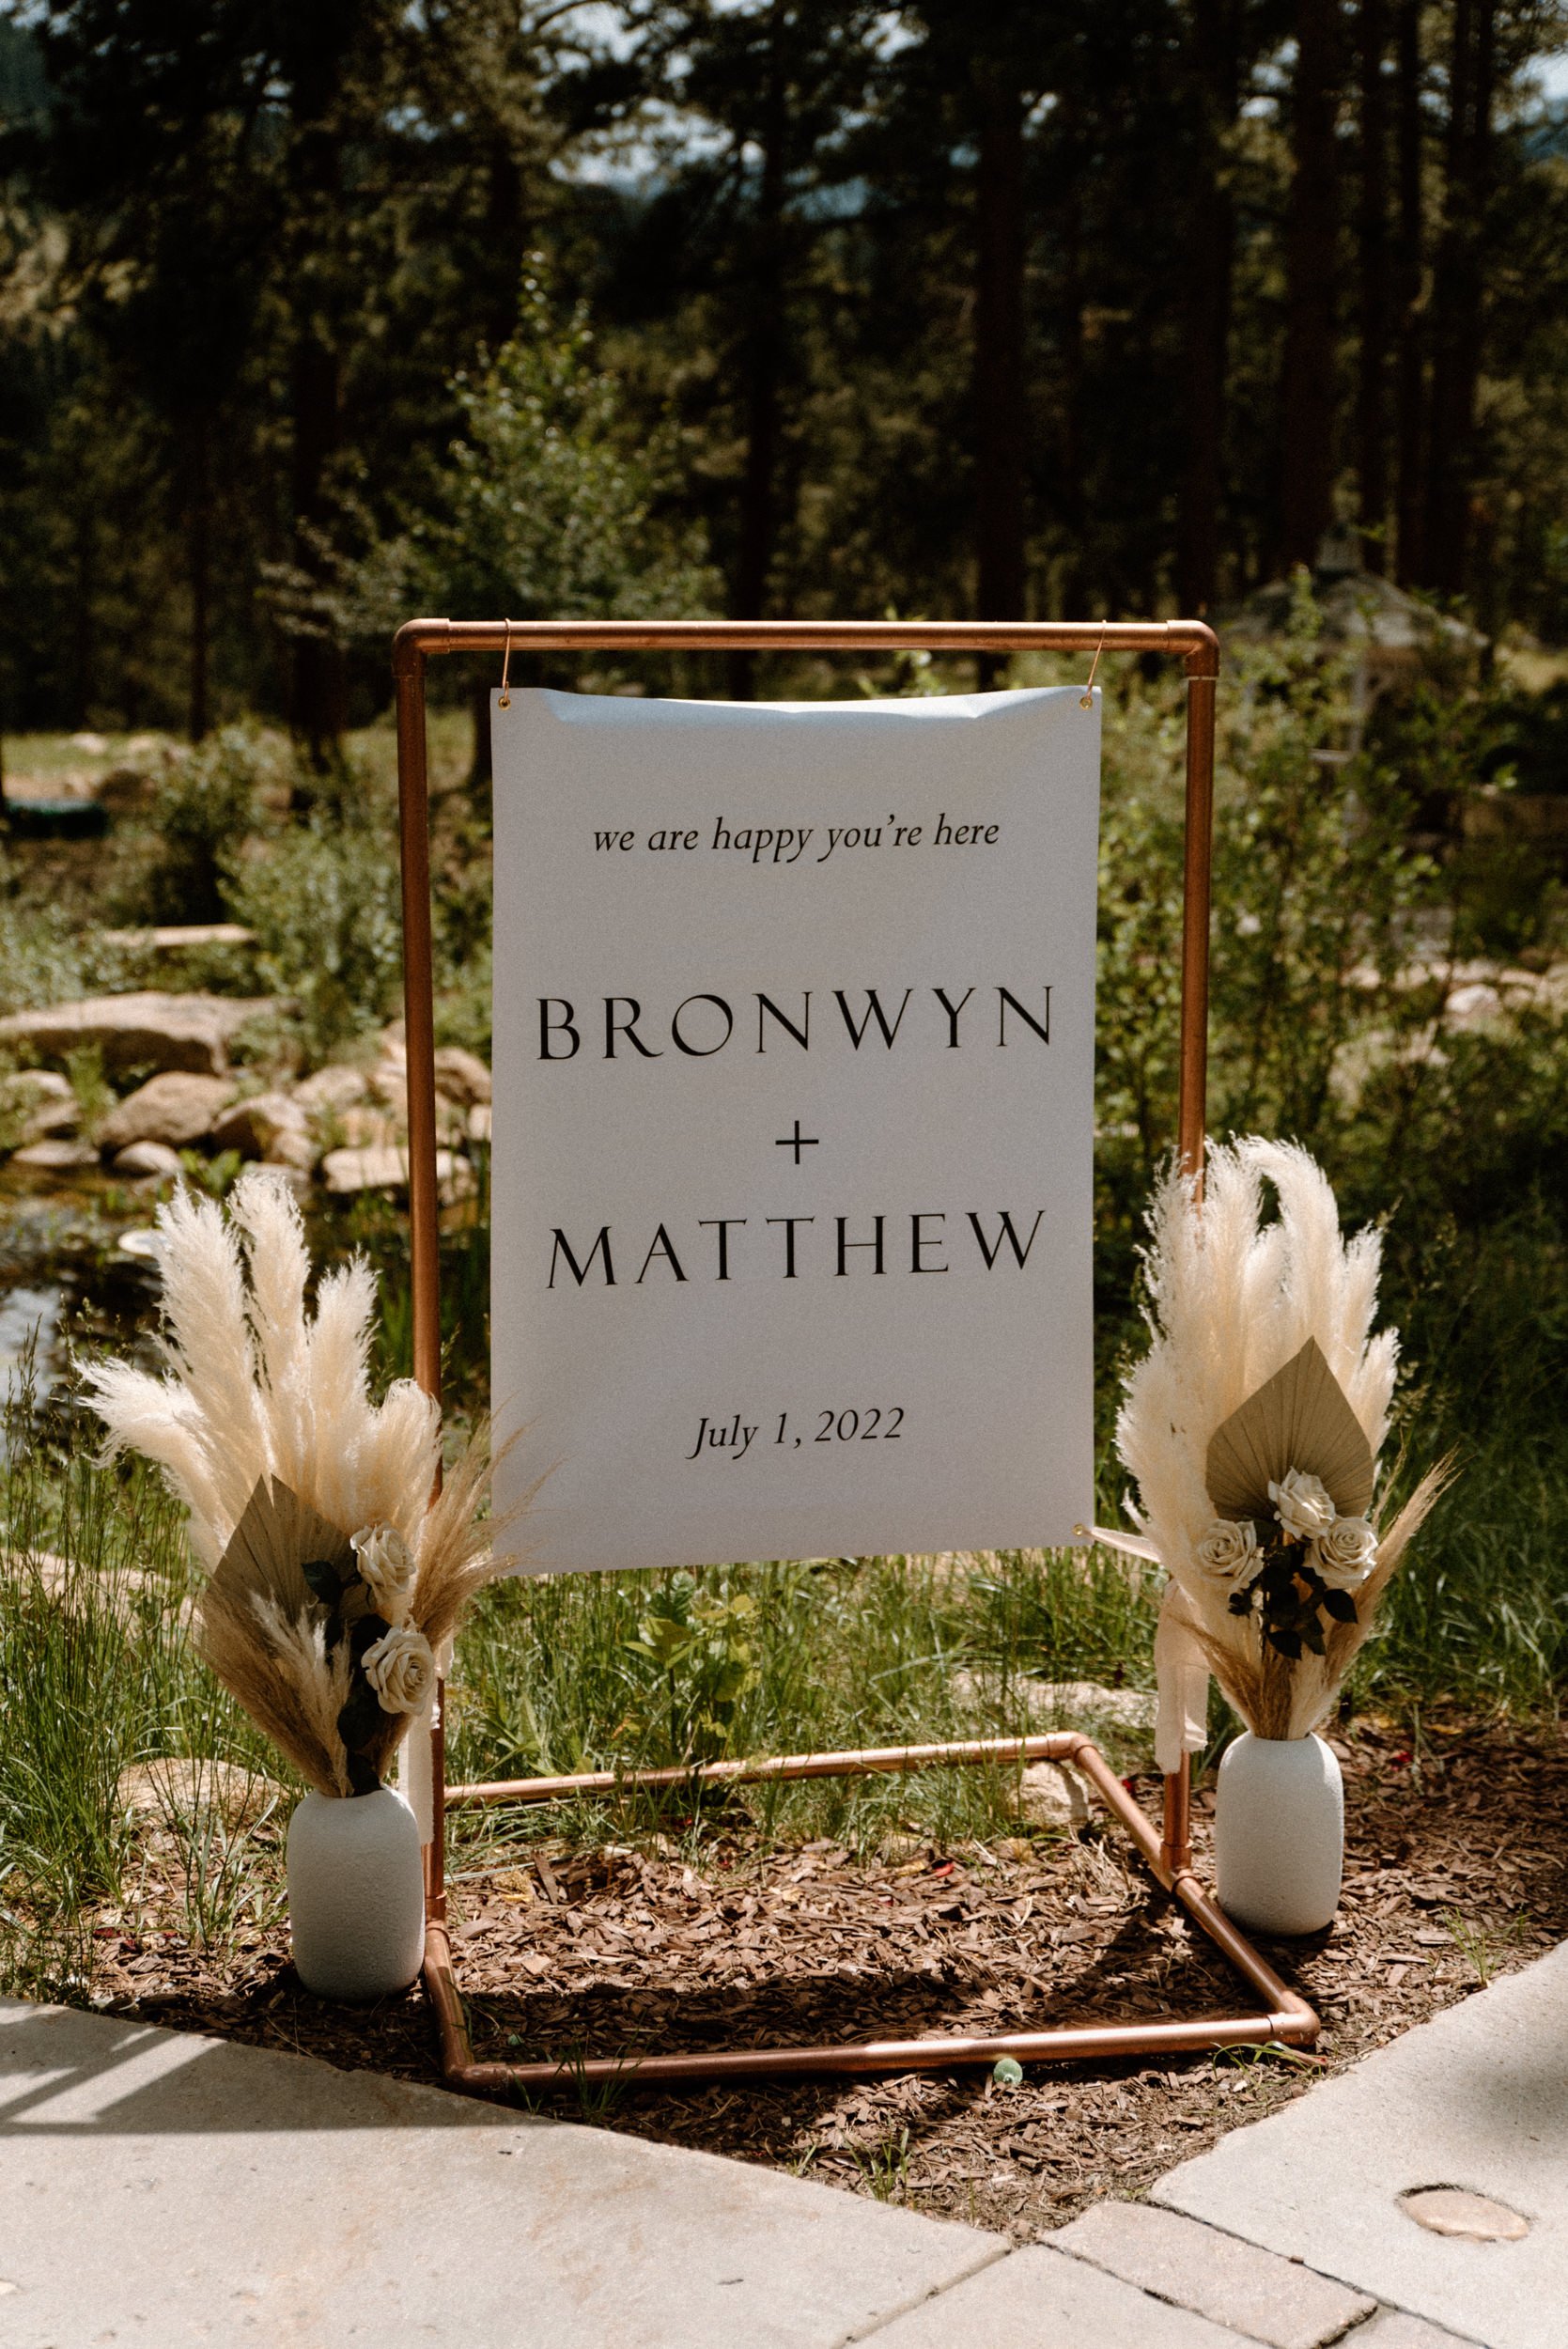 A white sign reads "We are happy you're here. Bronwyn + Matthew. July 1, 2022"